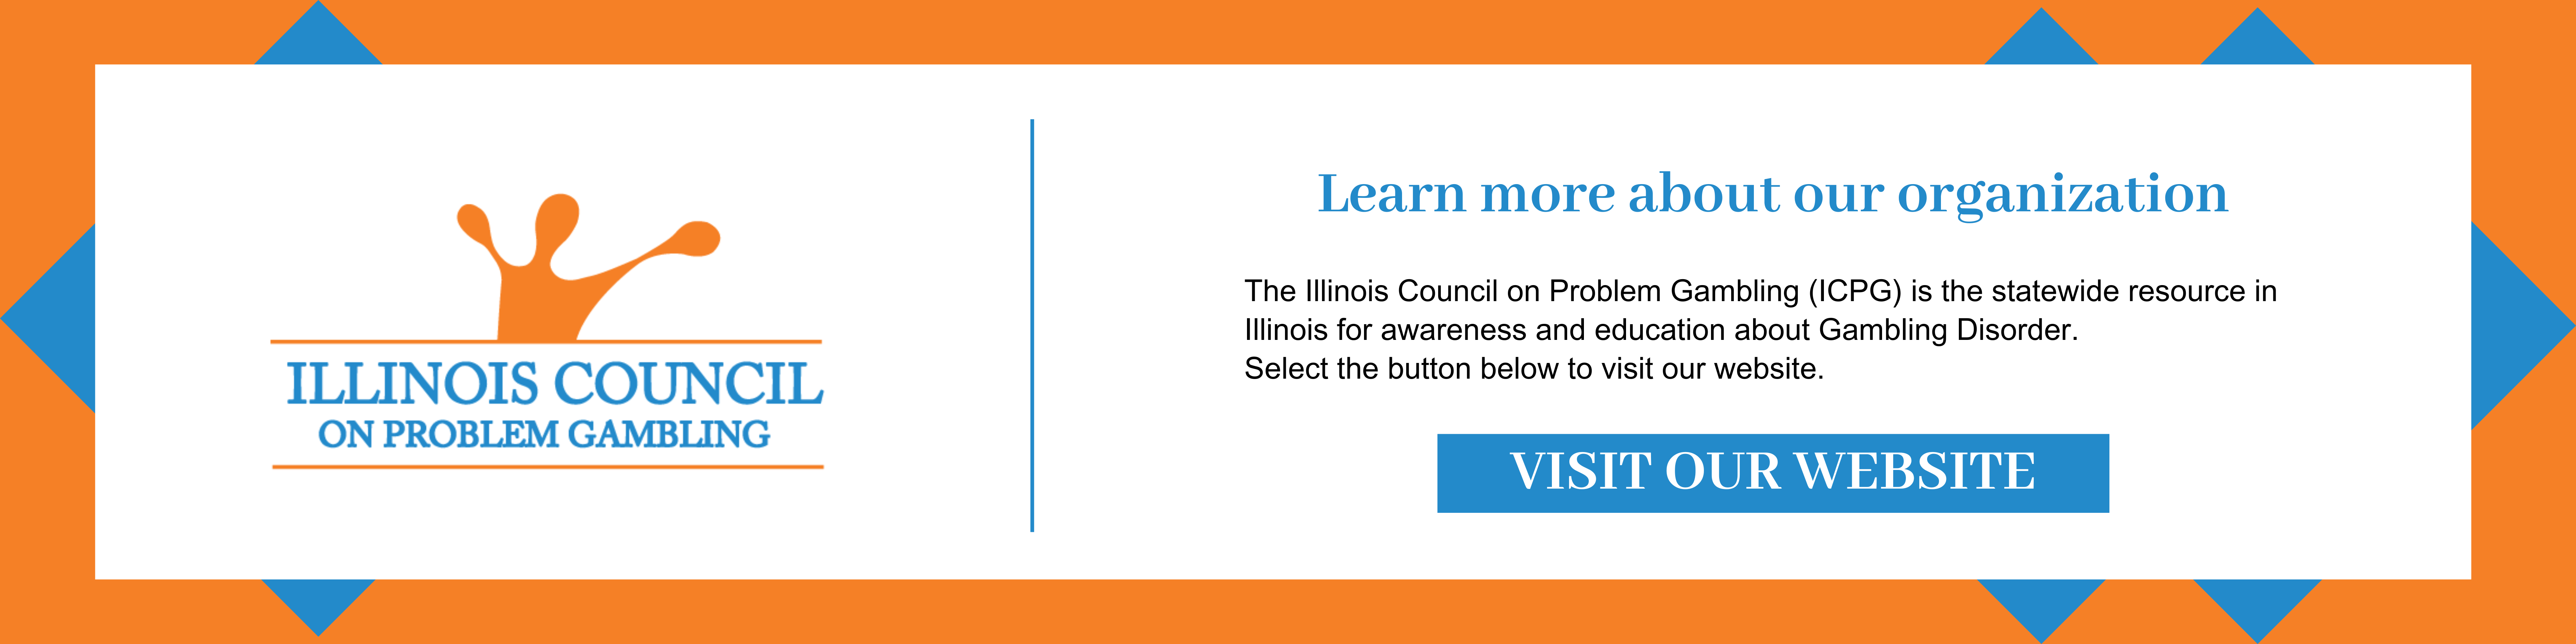 Learn more about our organization. The Illinois Council on Problem Gambling (ICPG) is the statewide resource in Illinois for awareness and education about Gambling Disorder. Select this image to visit our website. 